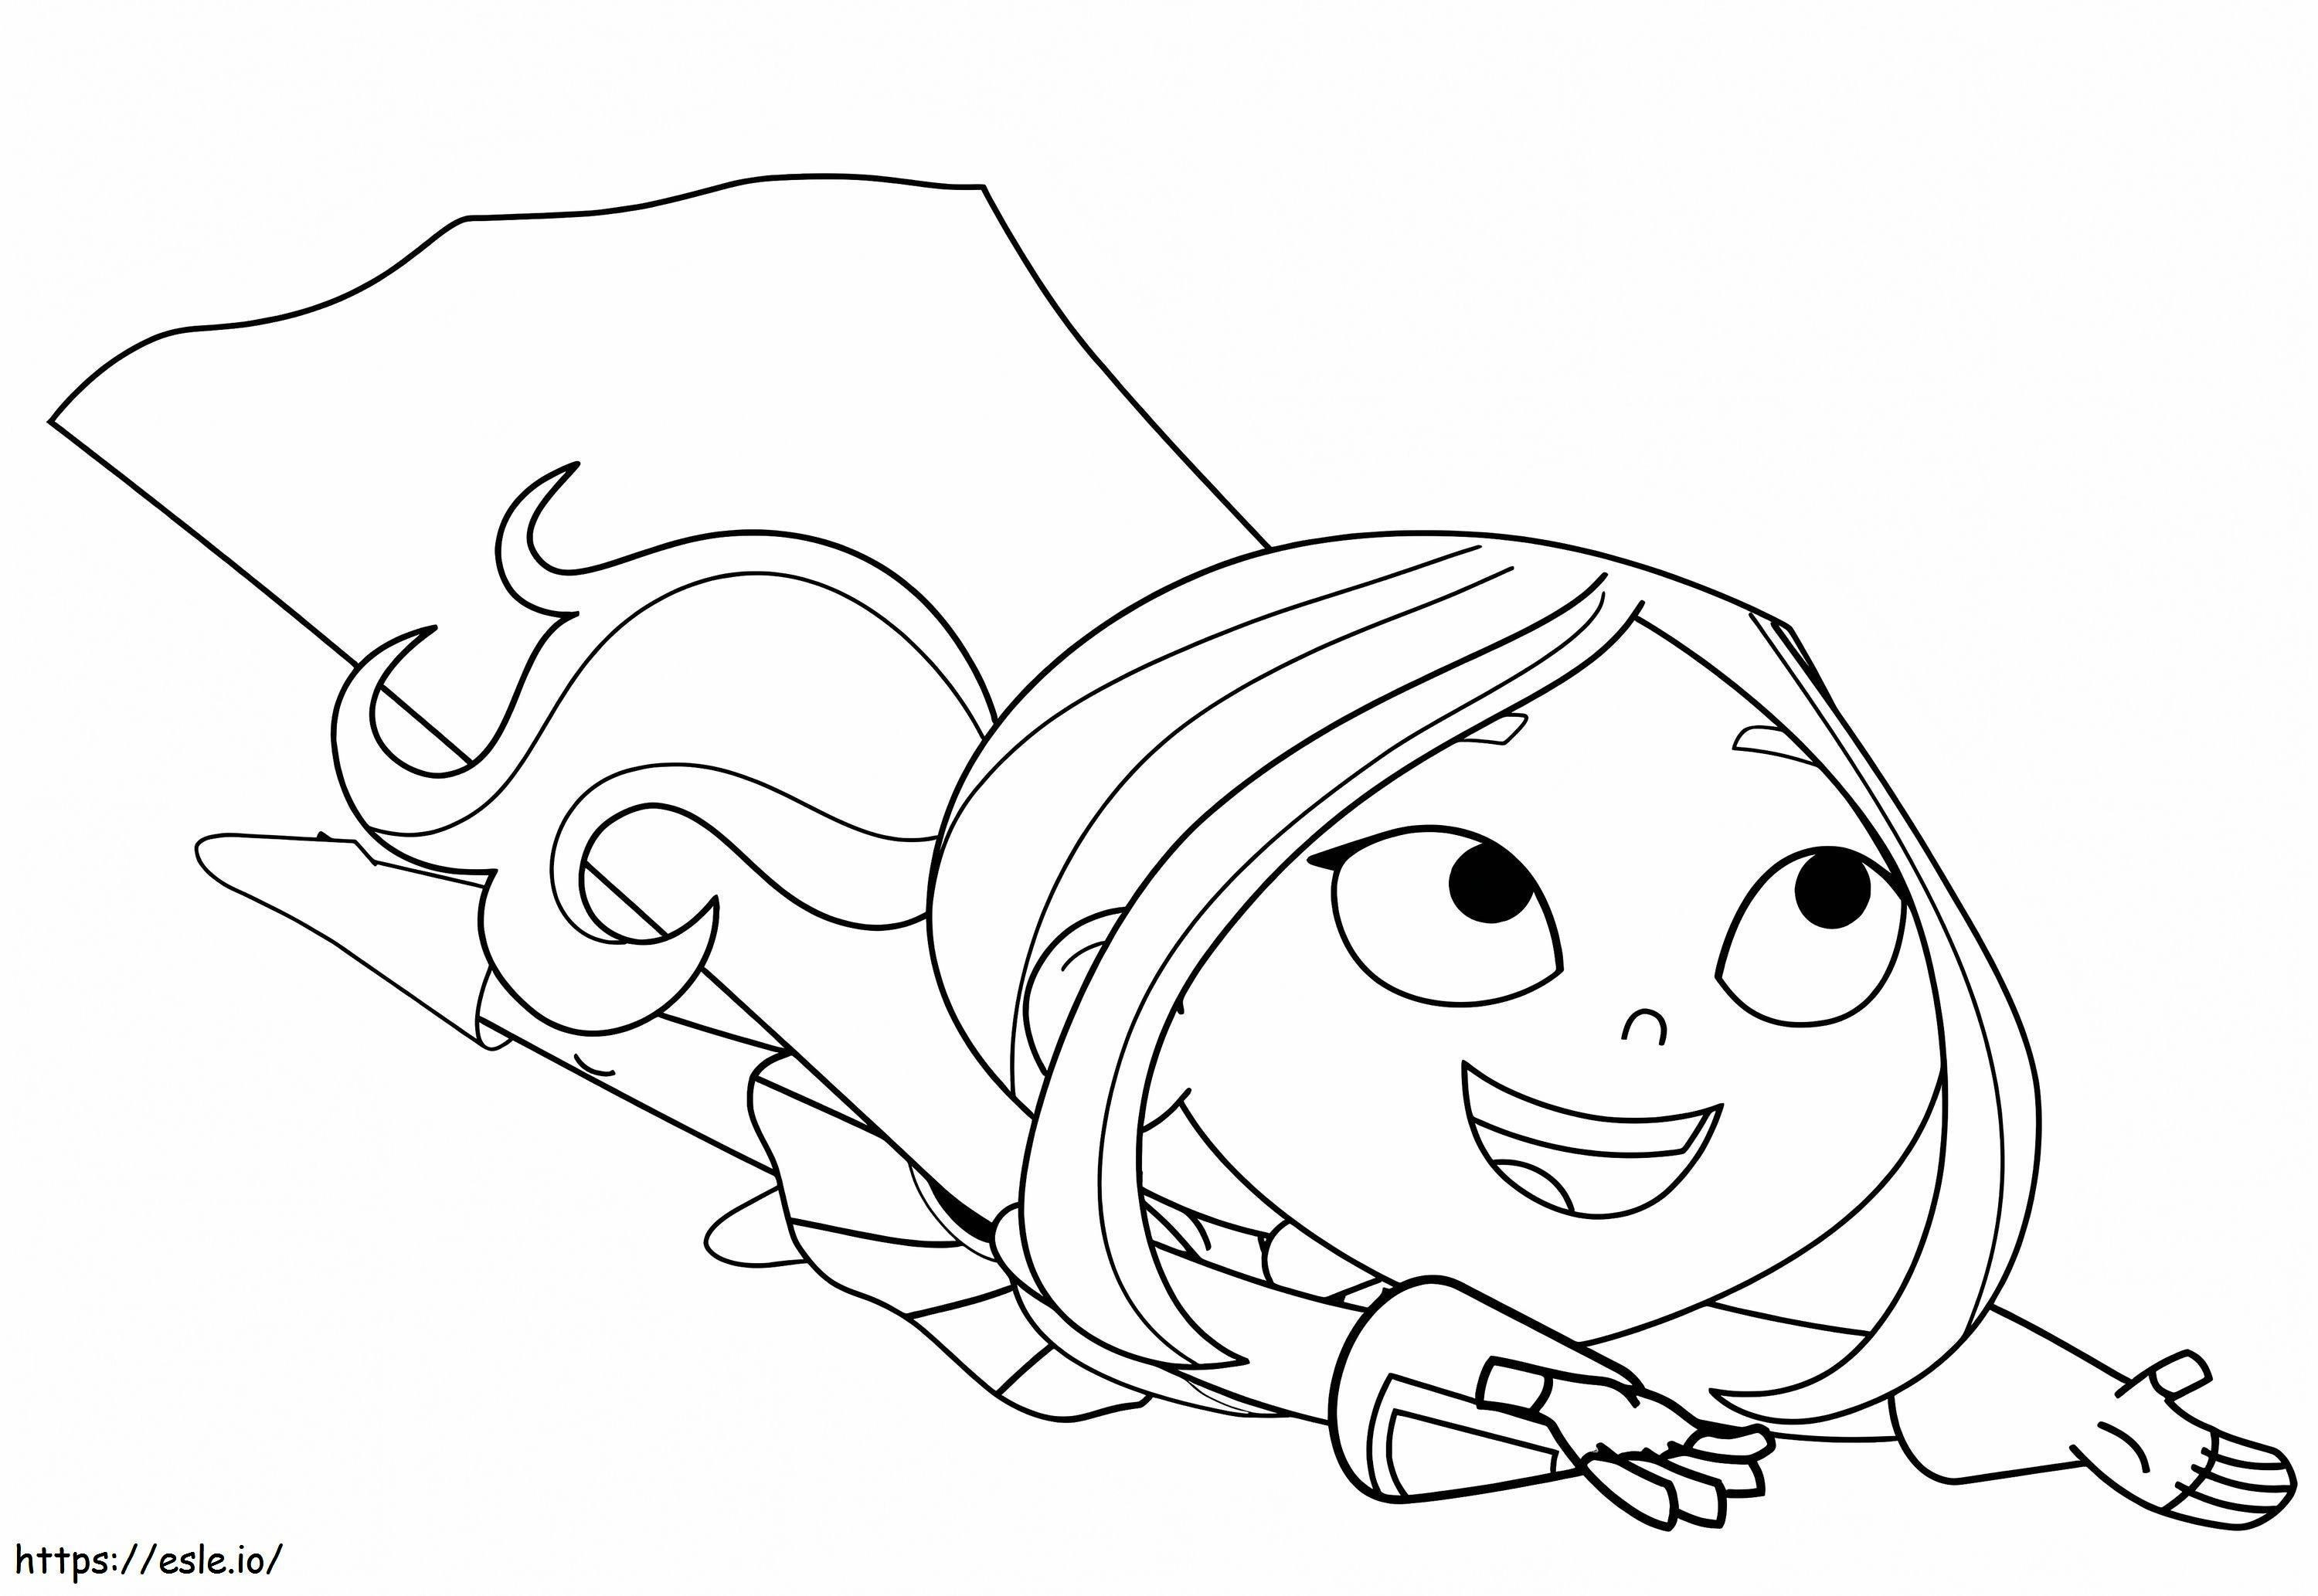 Lucita Sky Hero Elementary coloring page